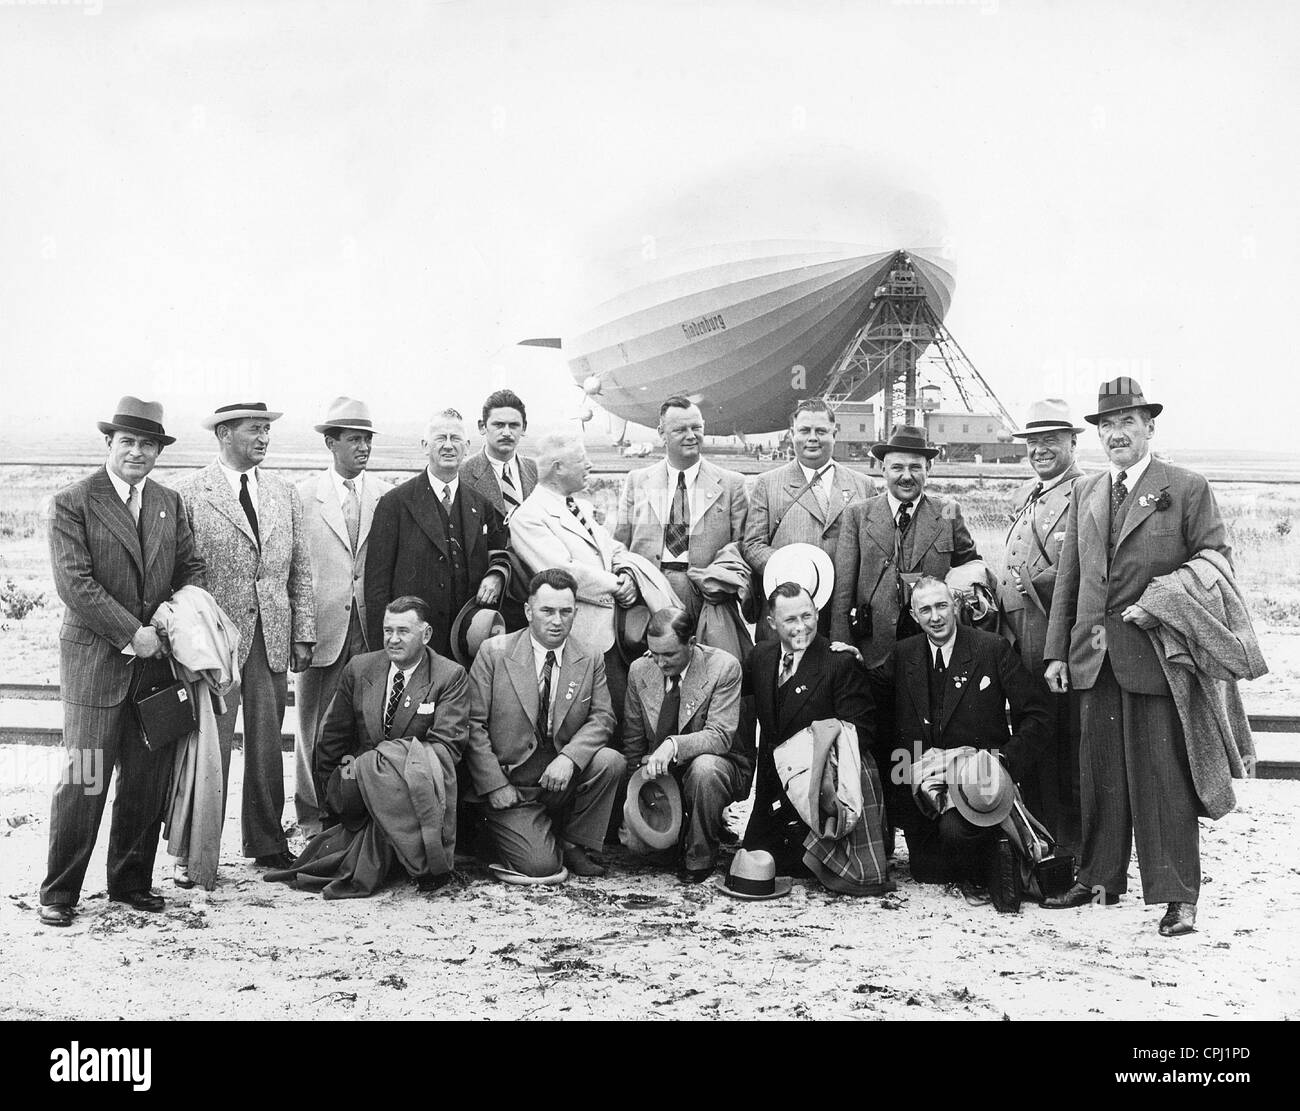 German Industrials of the Opel Group after their arrival with the zeppelin, 1936 Stock Photo